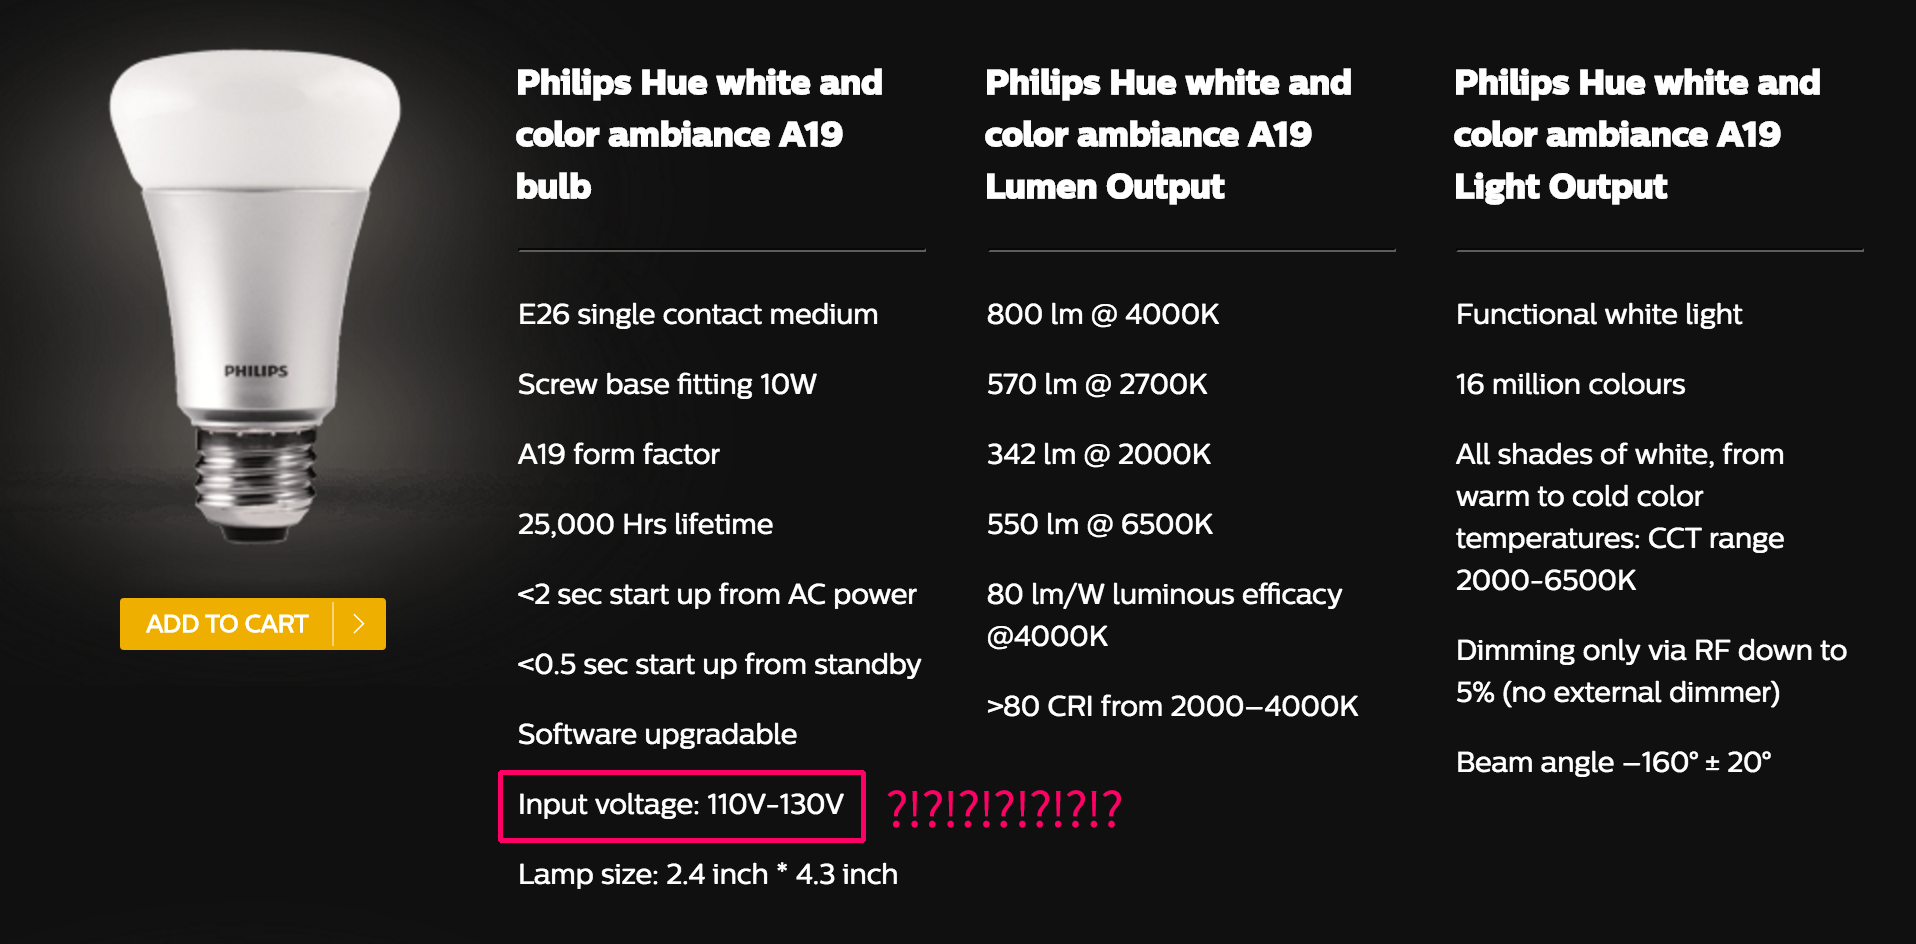 Specifications of Hue White and color ambiance bulb (2nd gen)